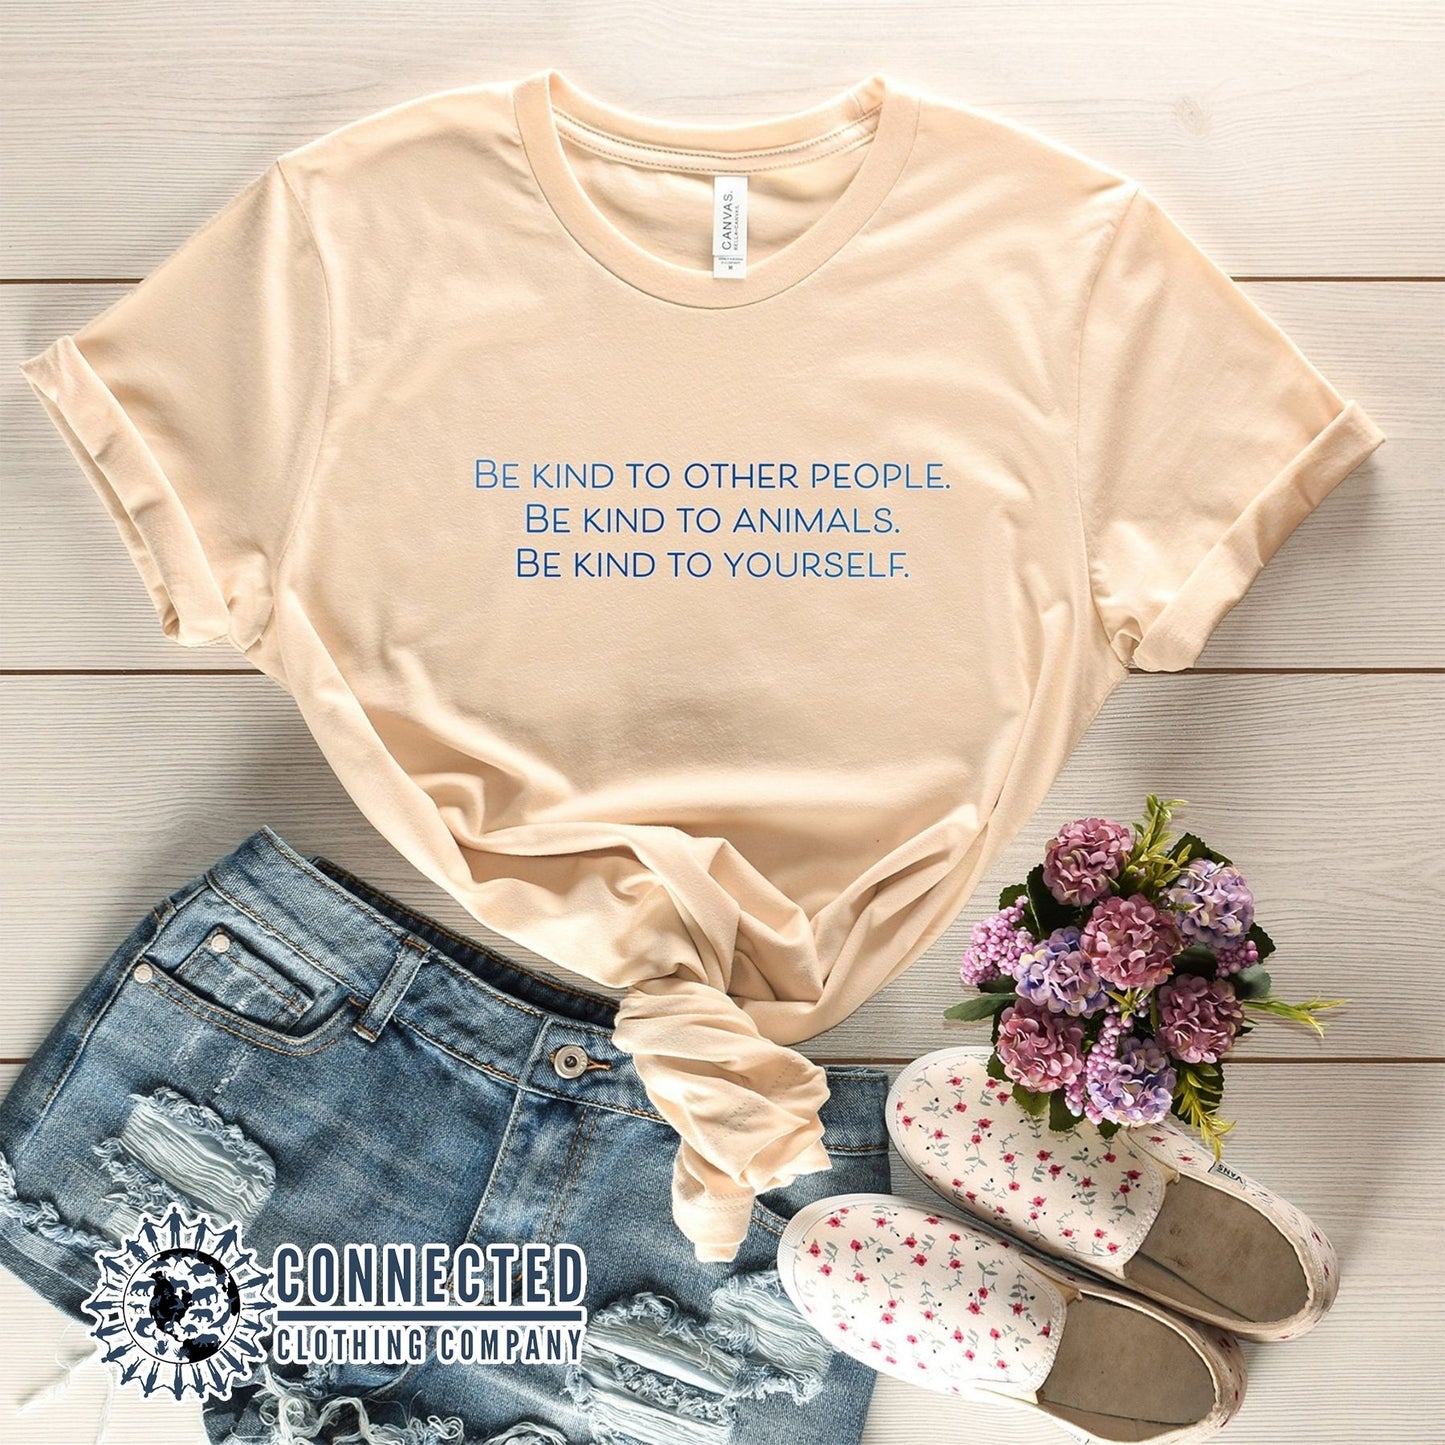 Soft Cream Be Kind To All Short-Sleeve Tee - Connected Clothing Company - 10% of profits donated to ocean conservation